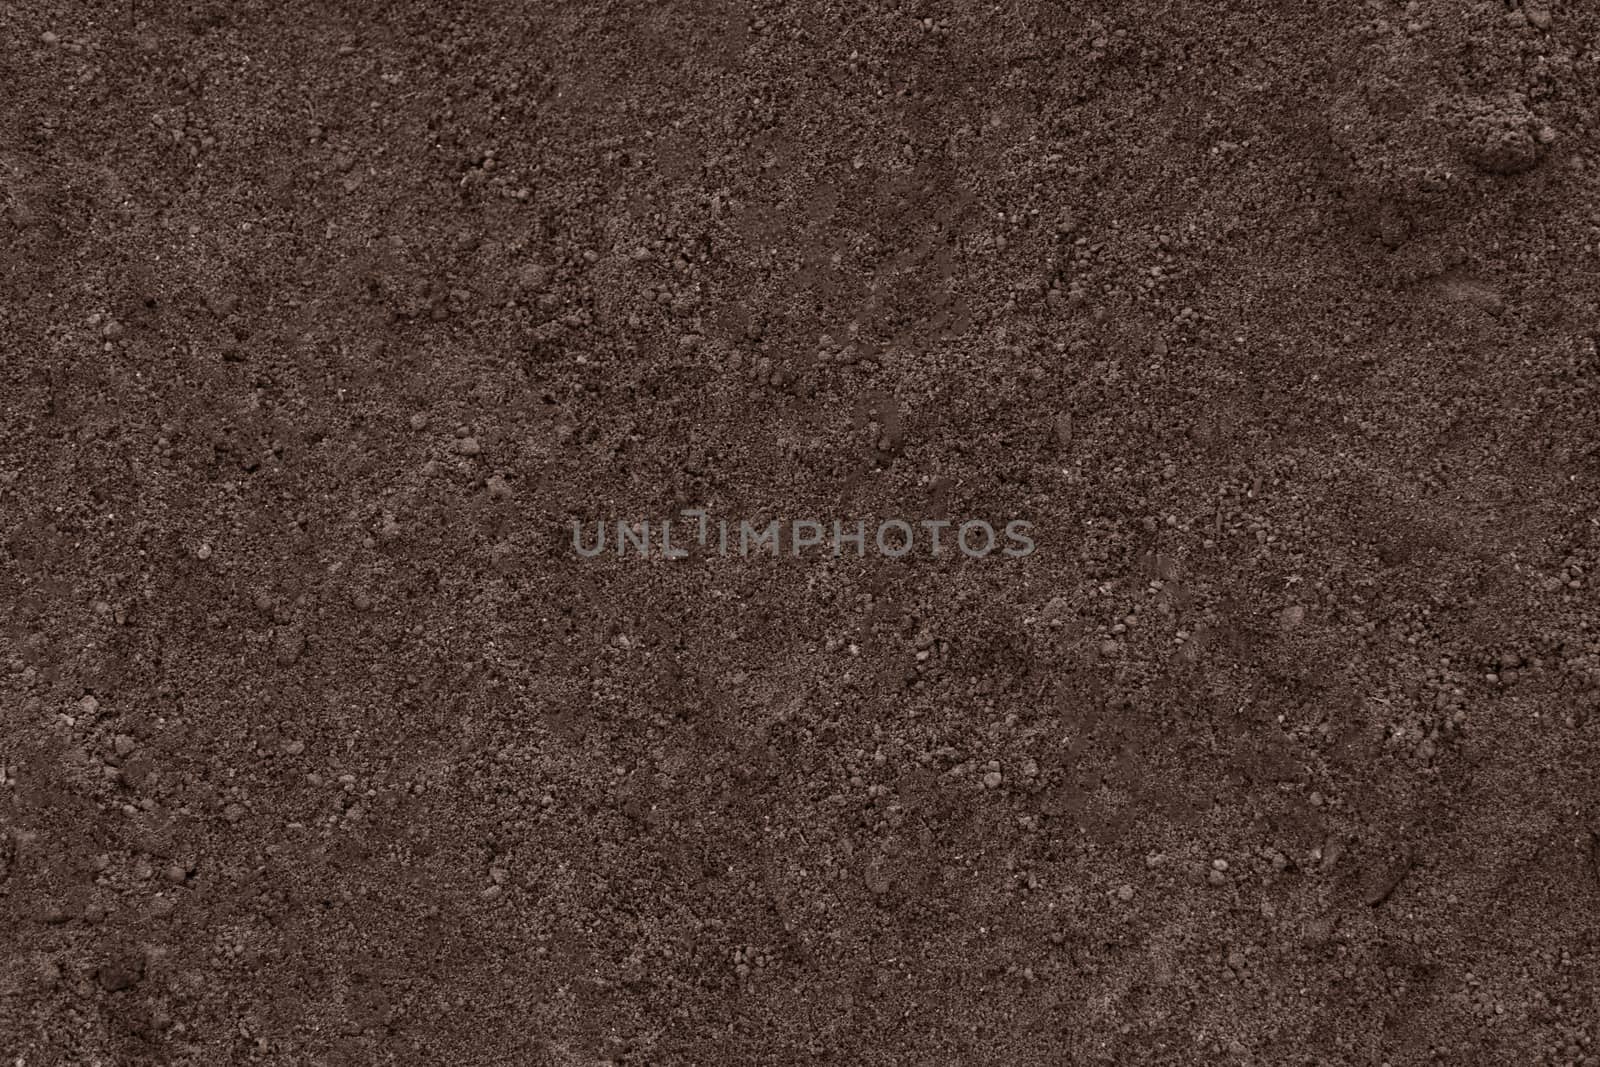 Soil clean ground texture background pattern. Dirt black earth